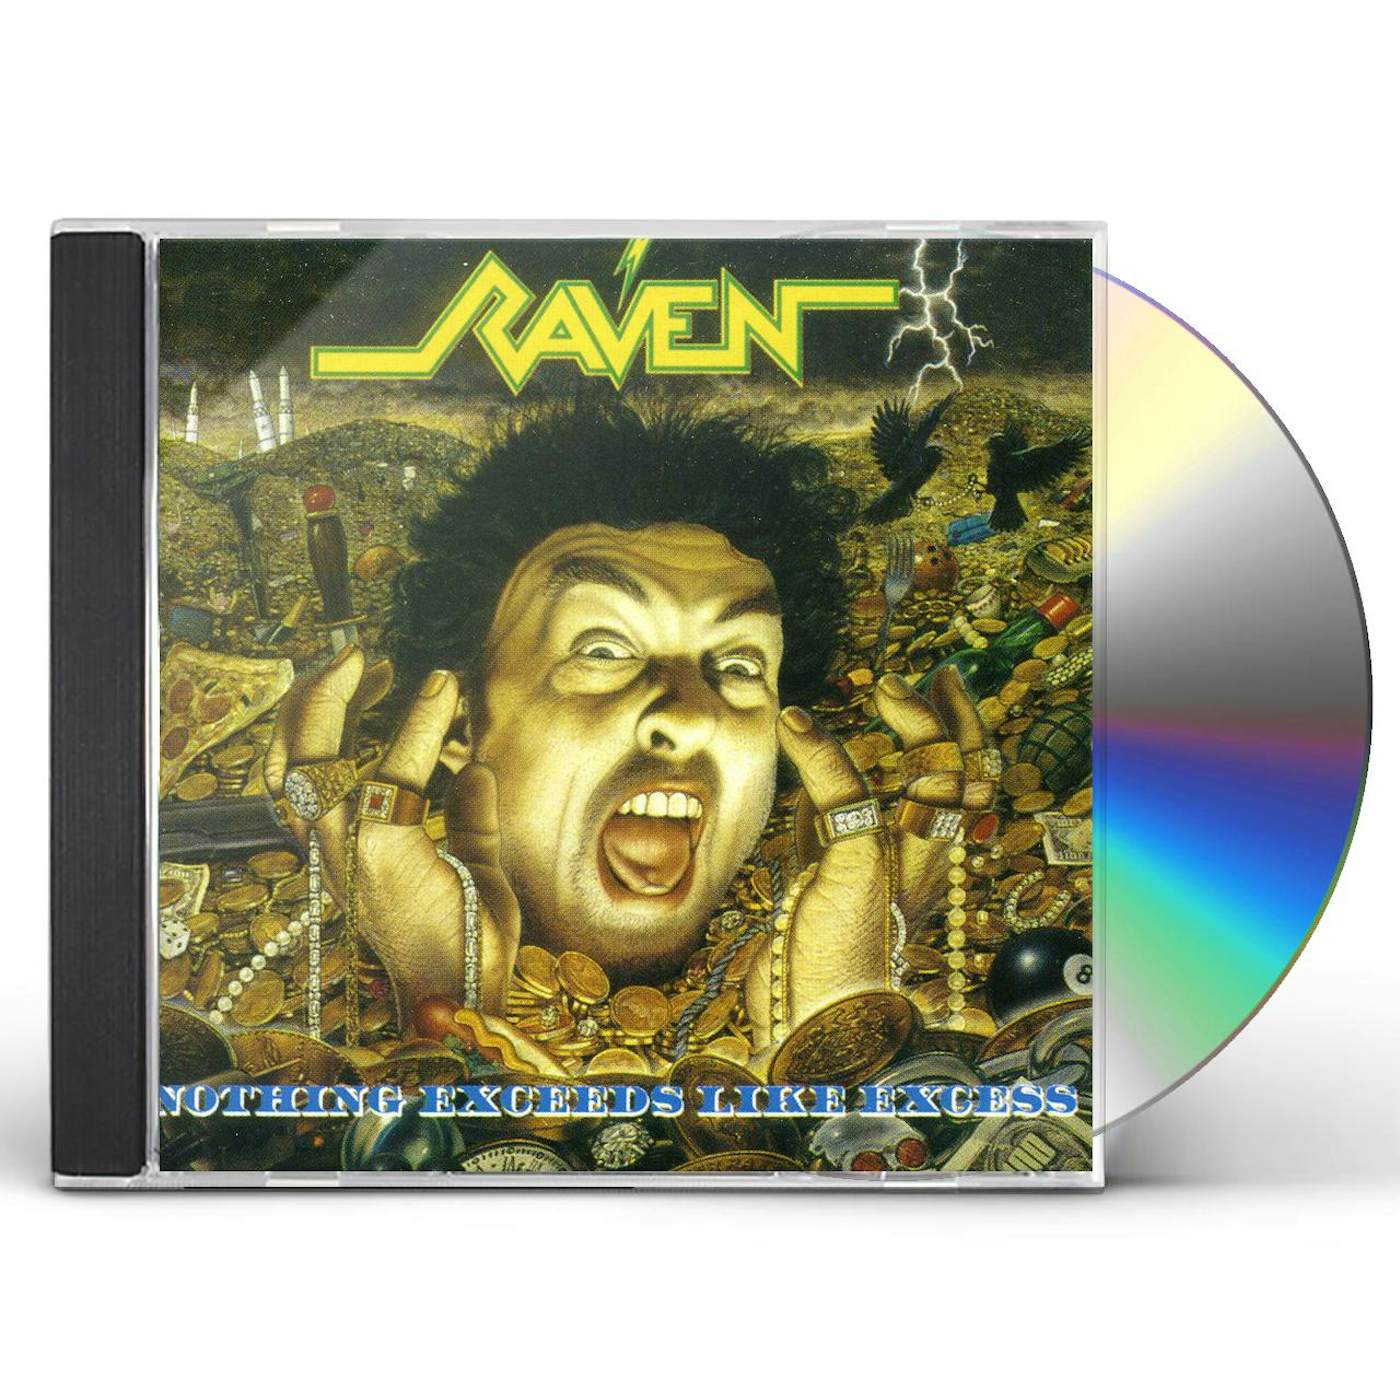 Raven NOTHING EXCEEDS LIKE EXCESS CD